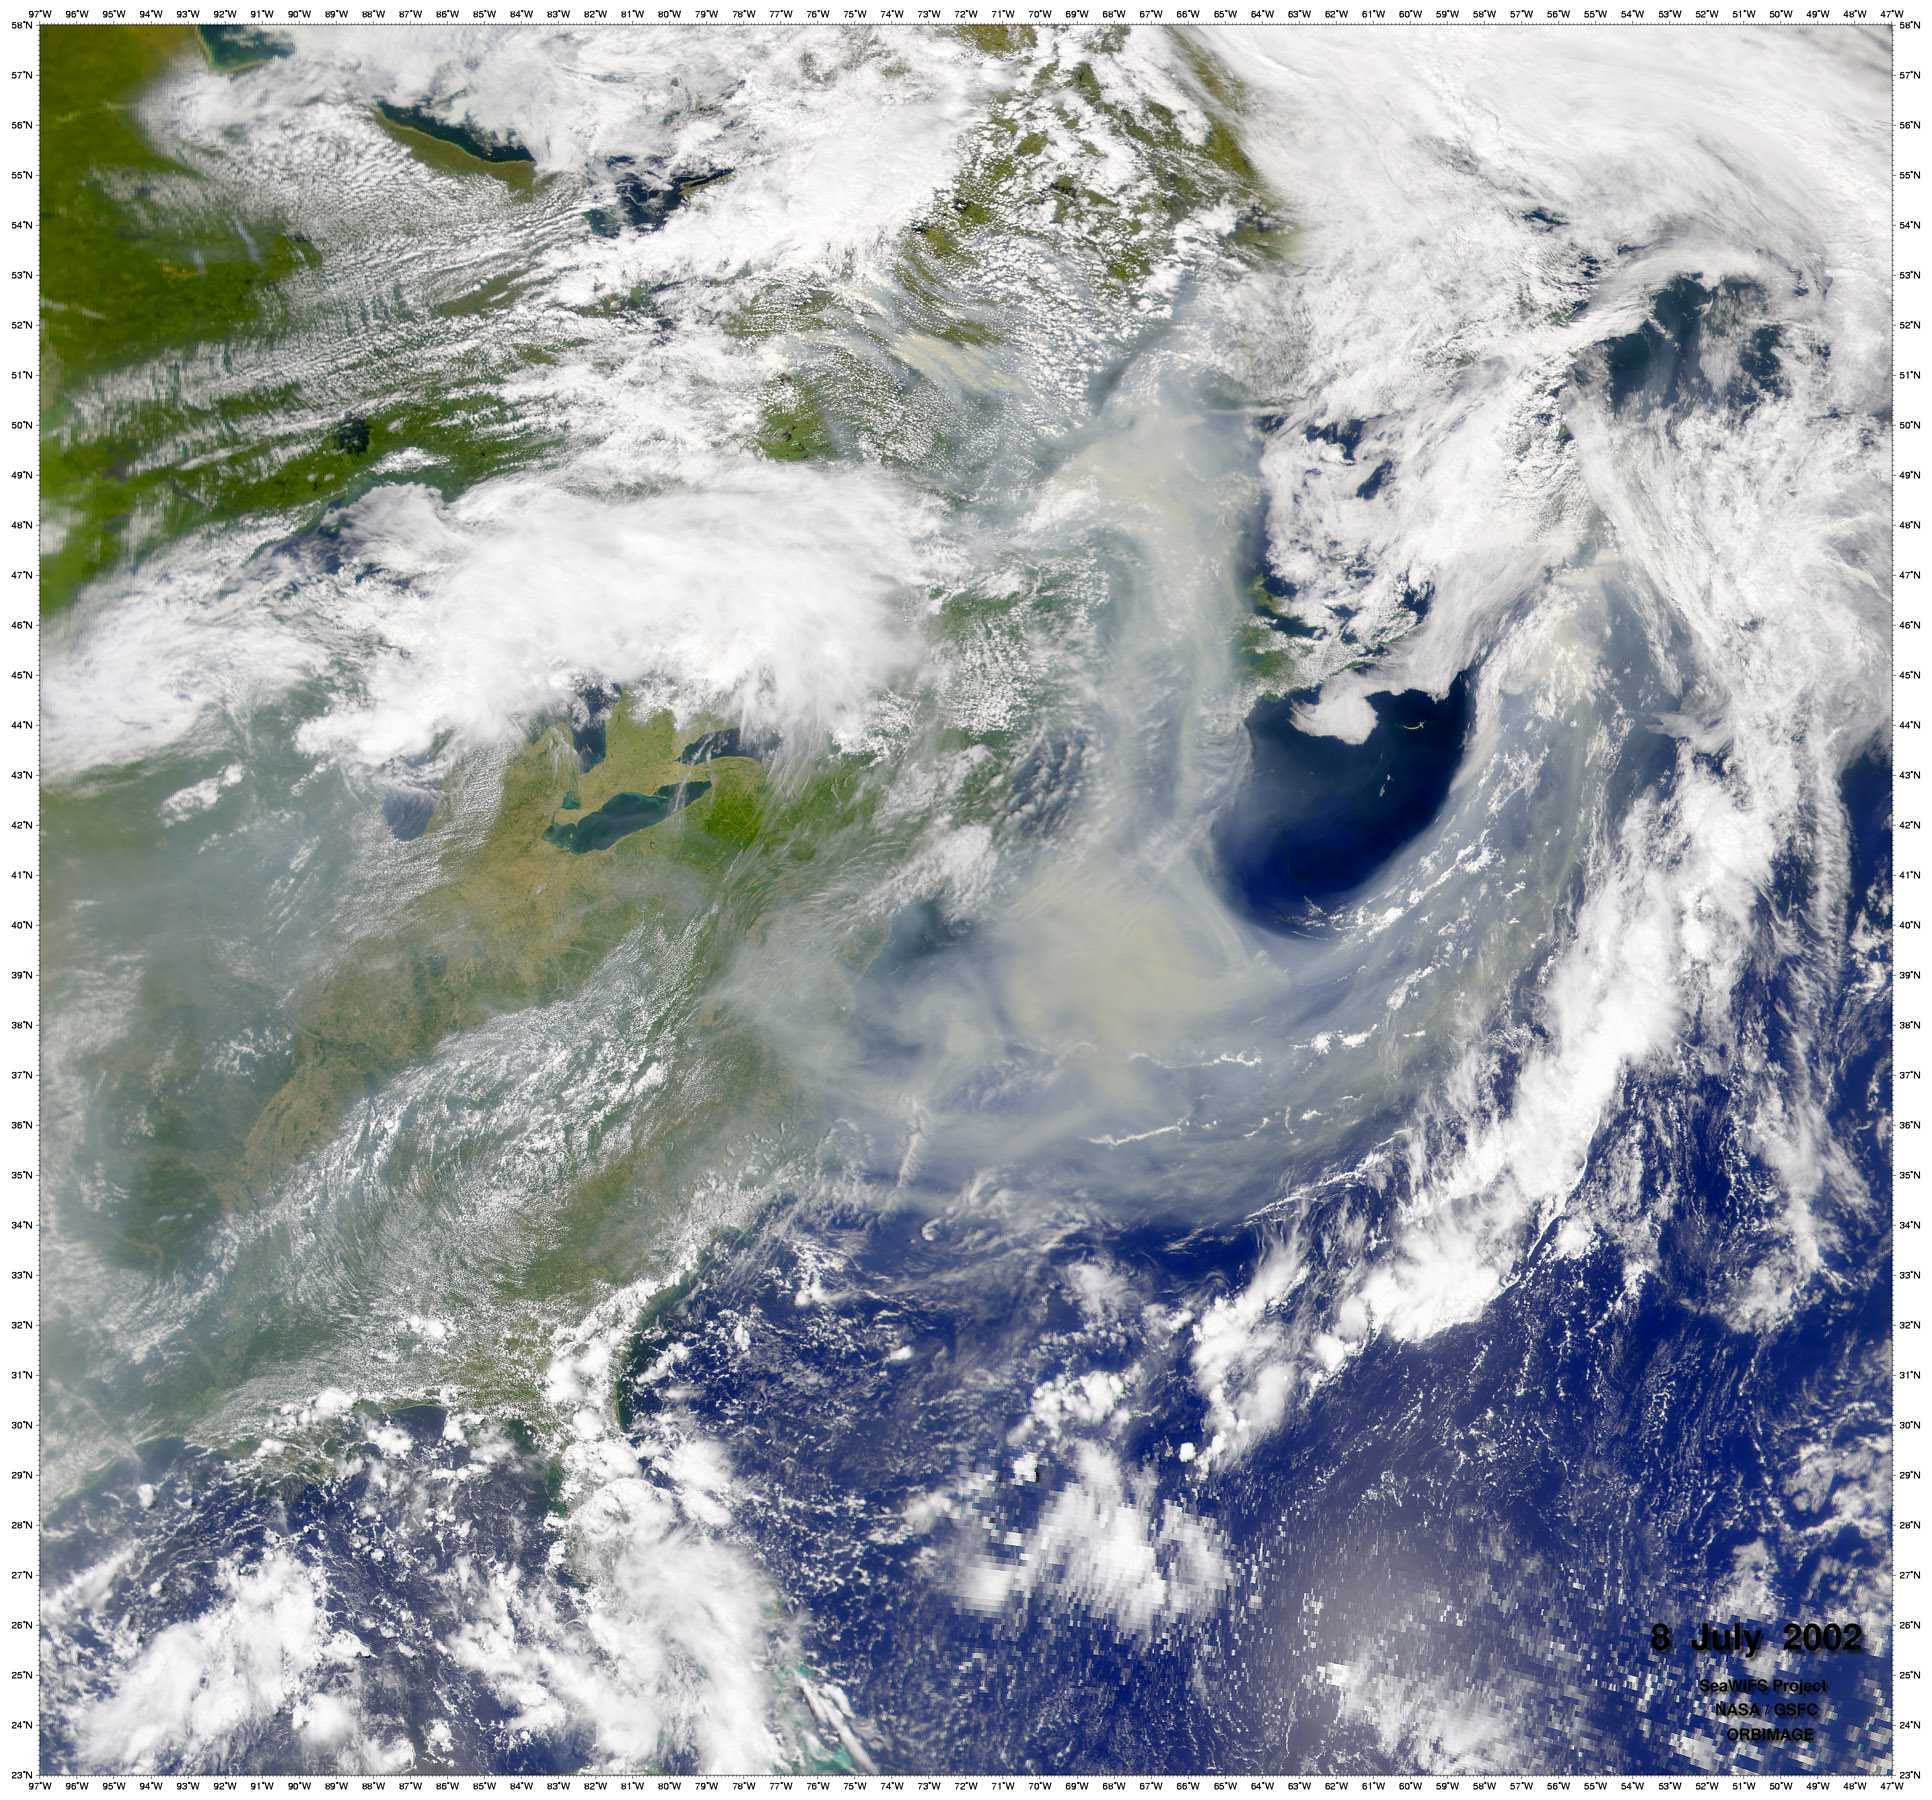 Smoke from Canadian Fires Blankets Eastern U.S. - related image preview